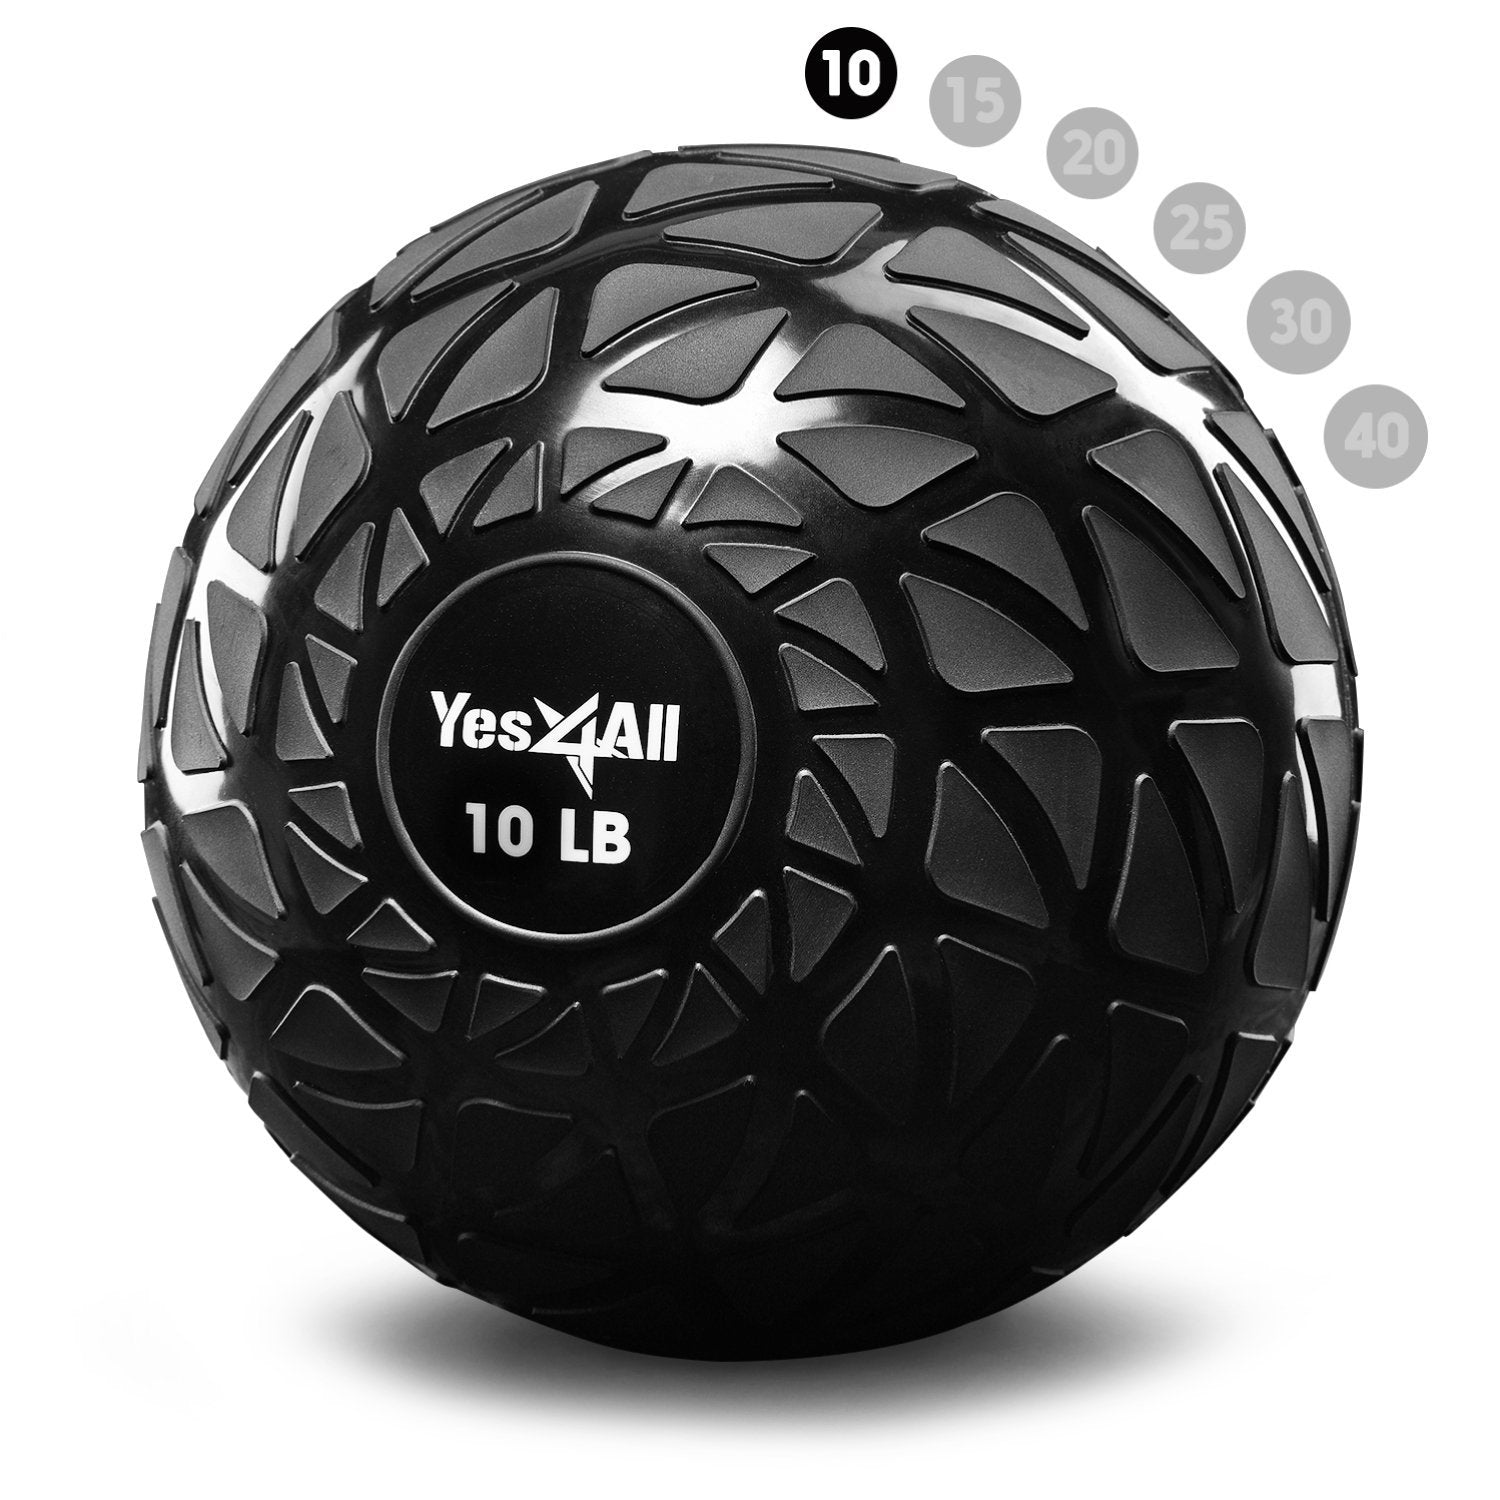 Yes4All 10 lbs Slam Ball for Strength and Crossfit Workout ? Slam Medicine Ball (10 lbs, Black)